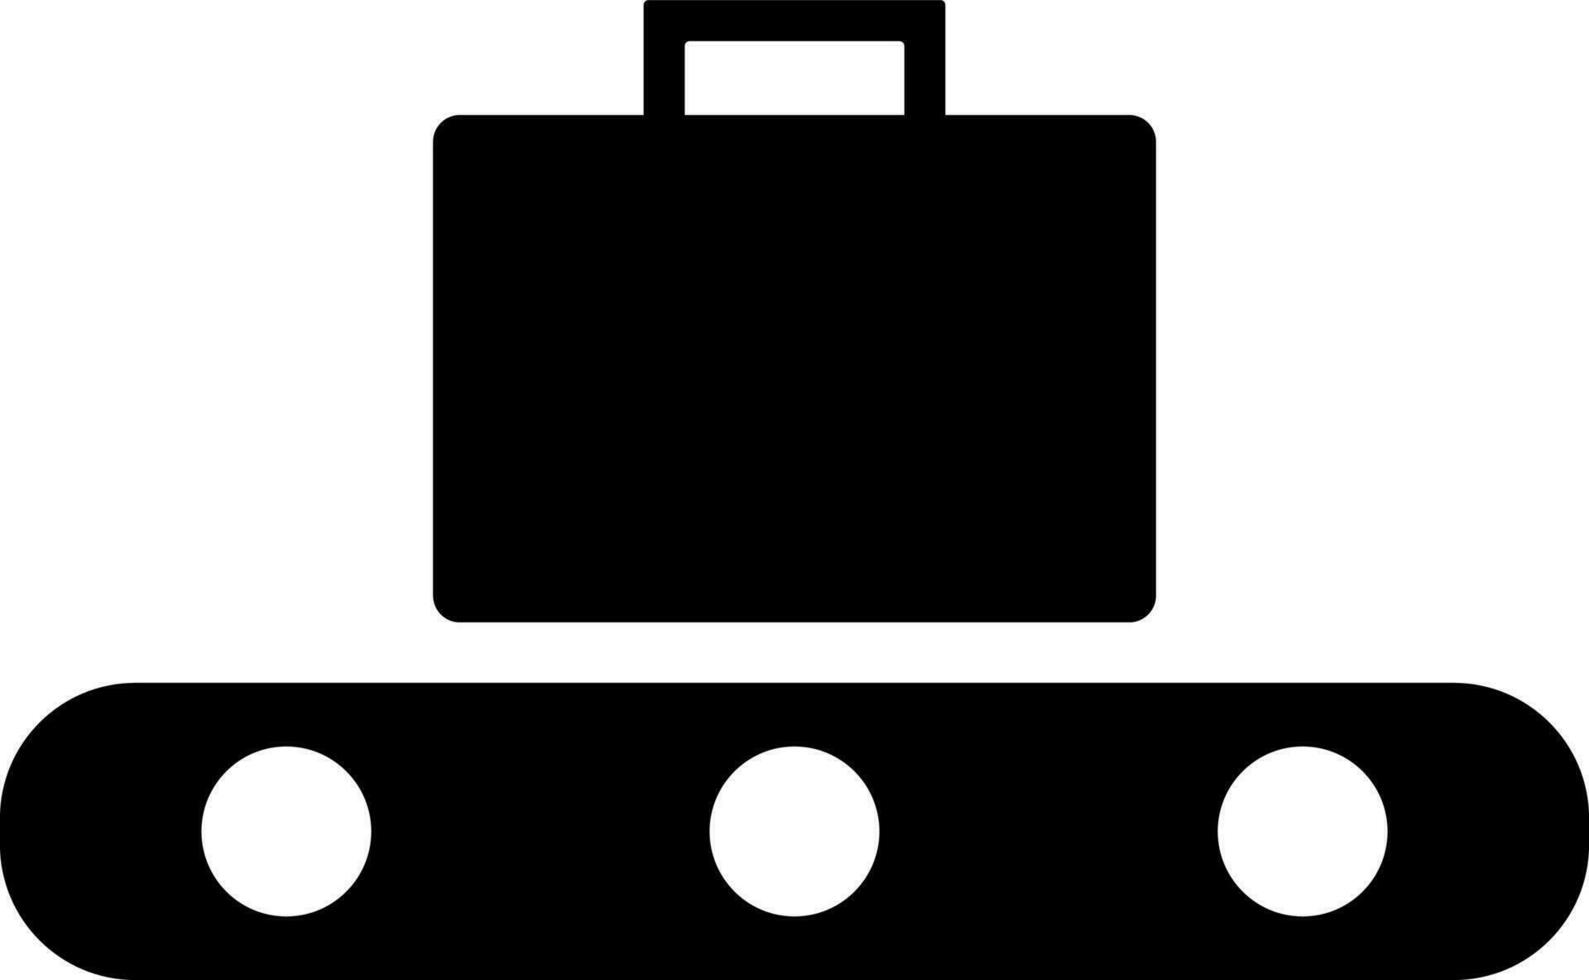 Black and White illustration of bag checking icon. vector